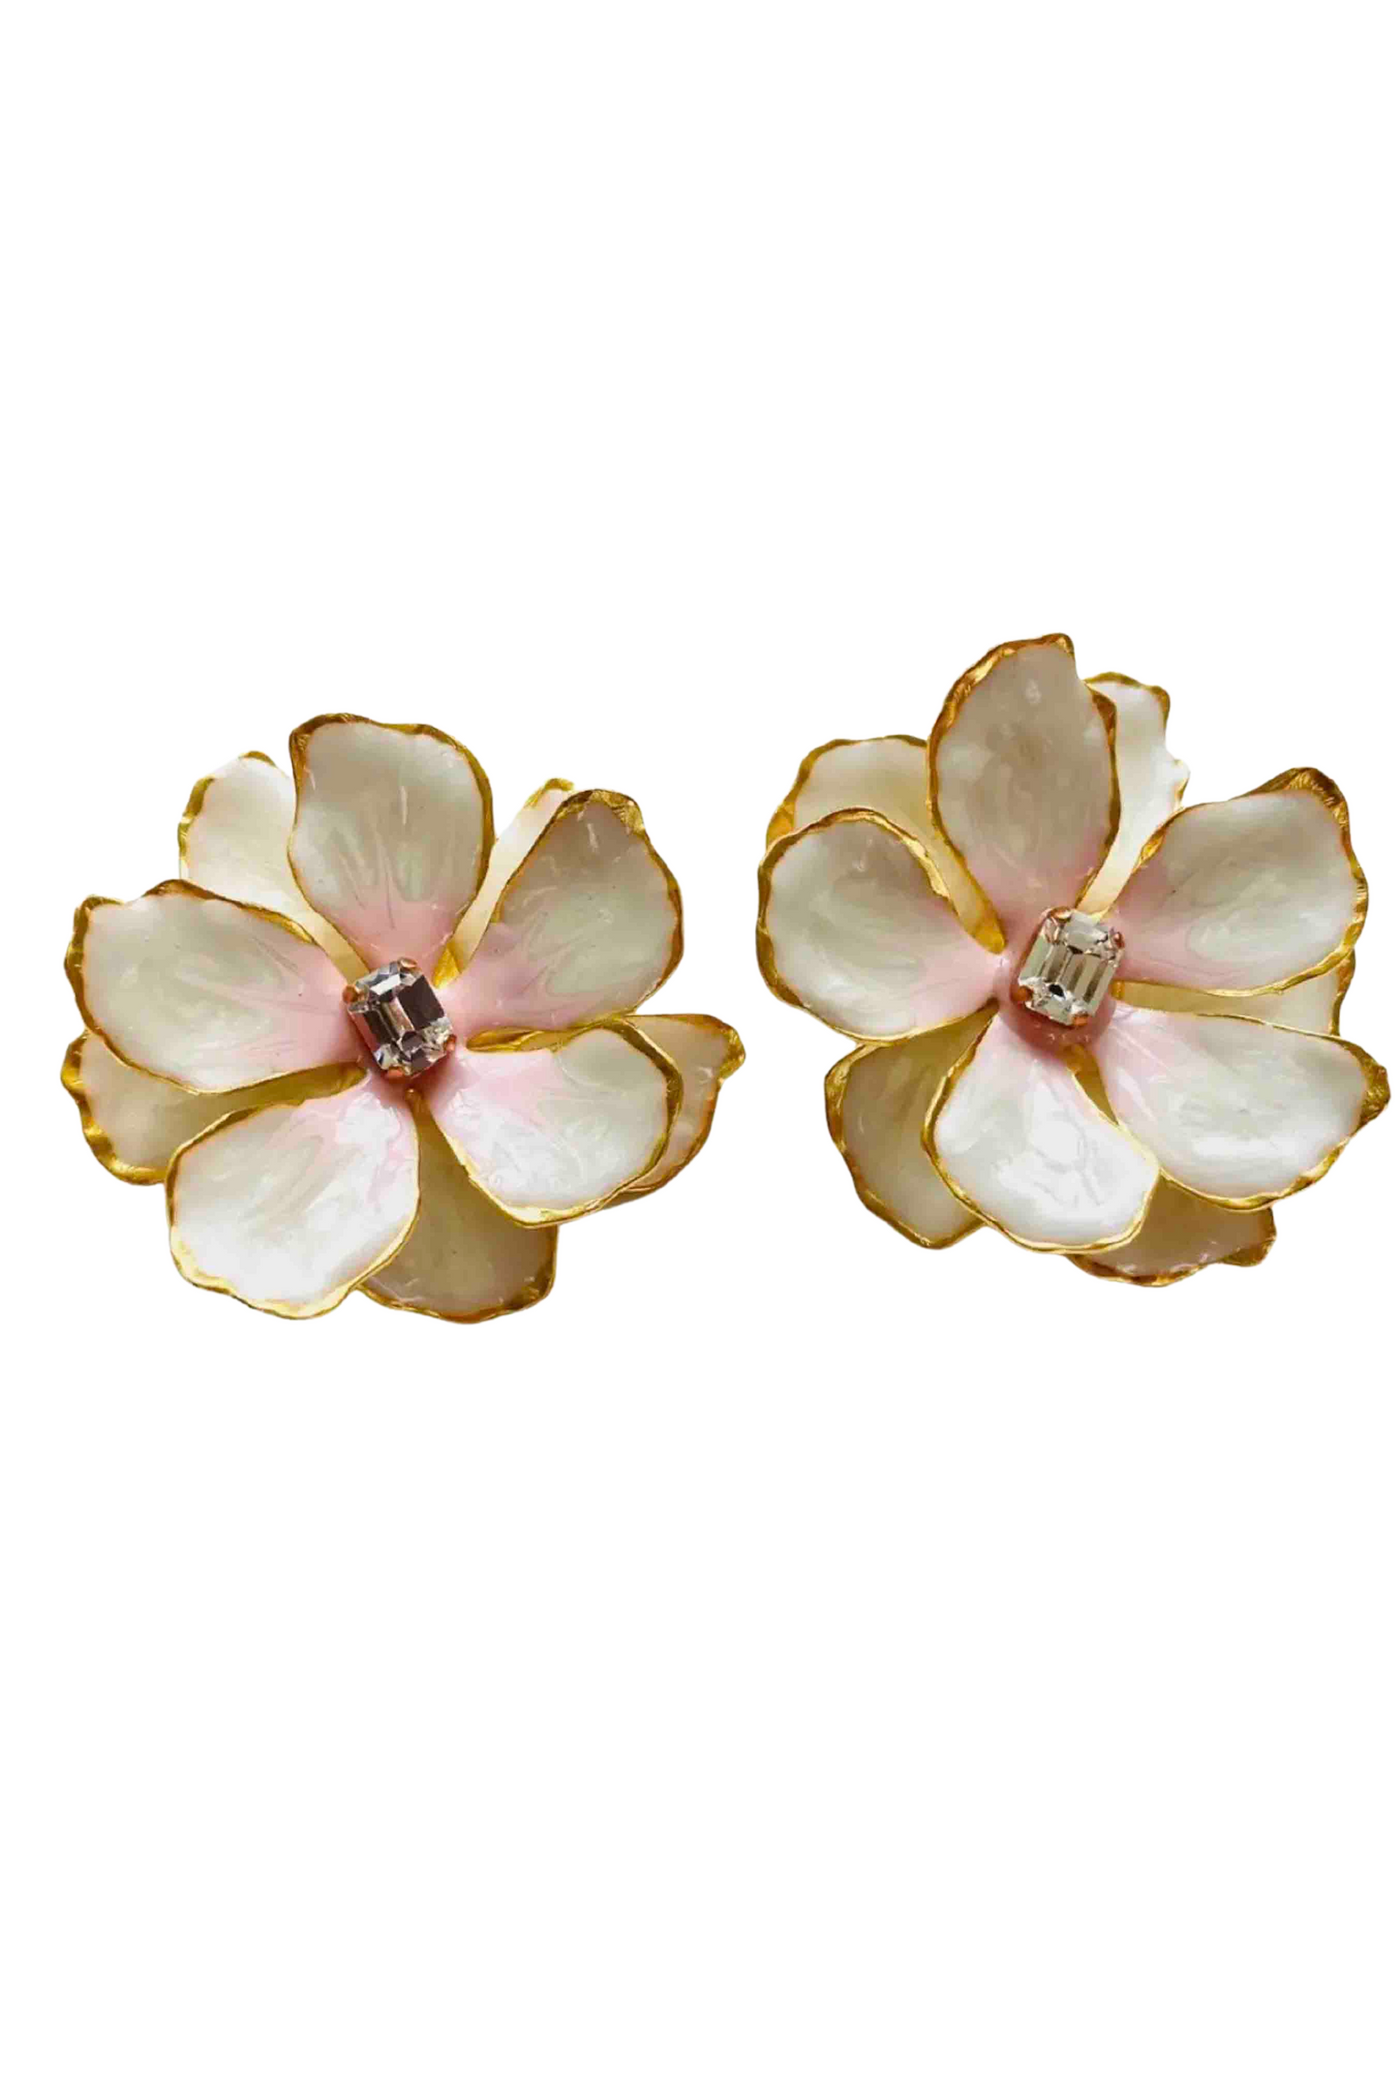 Bride Pearl and Pink Jewel Box Flower Earring by The Pink Reef